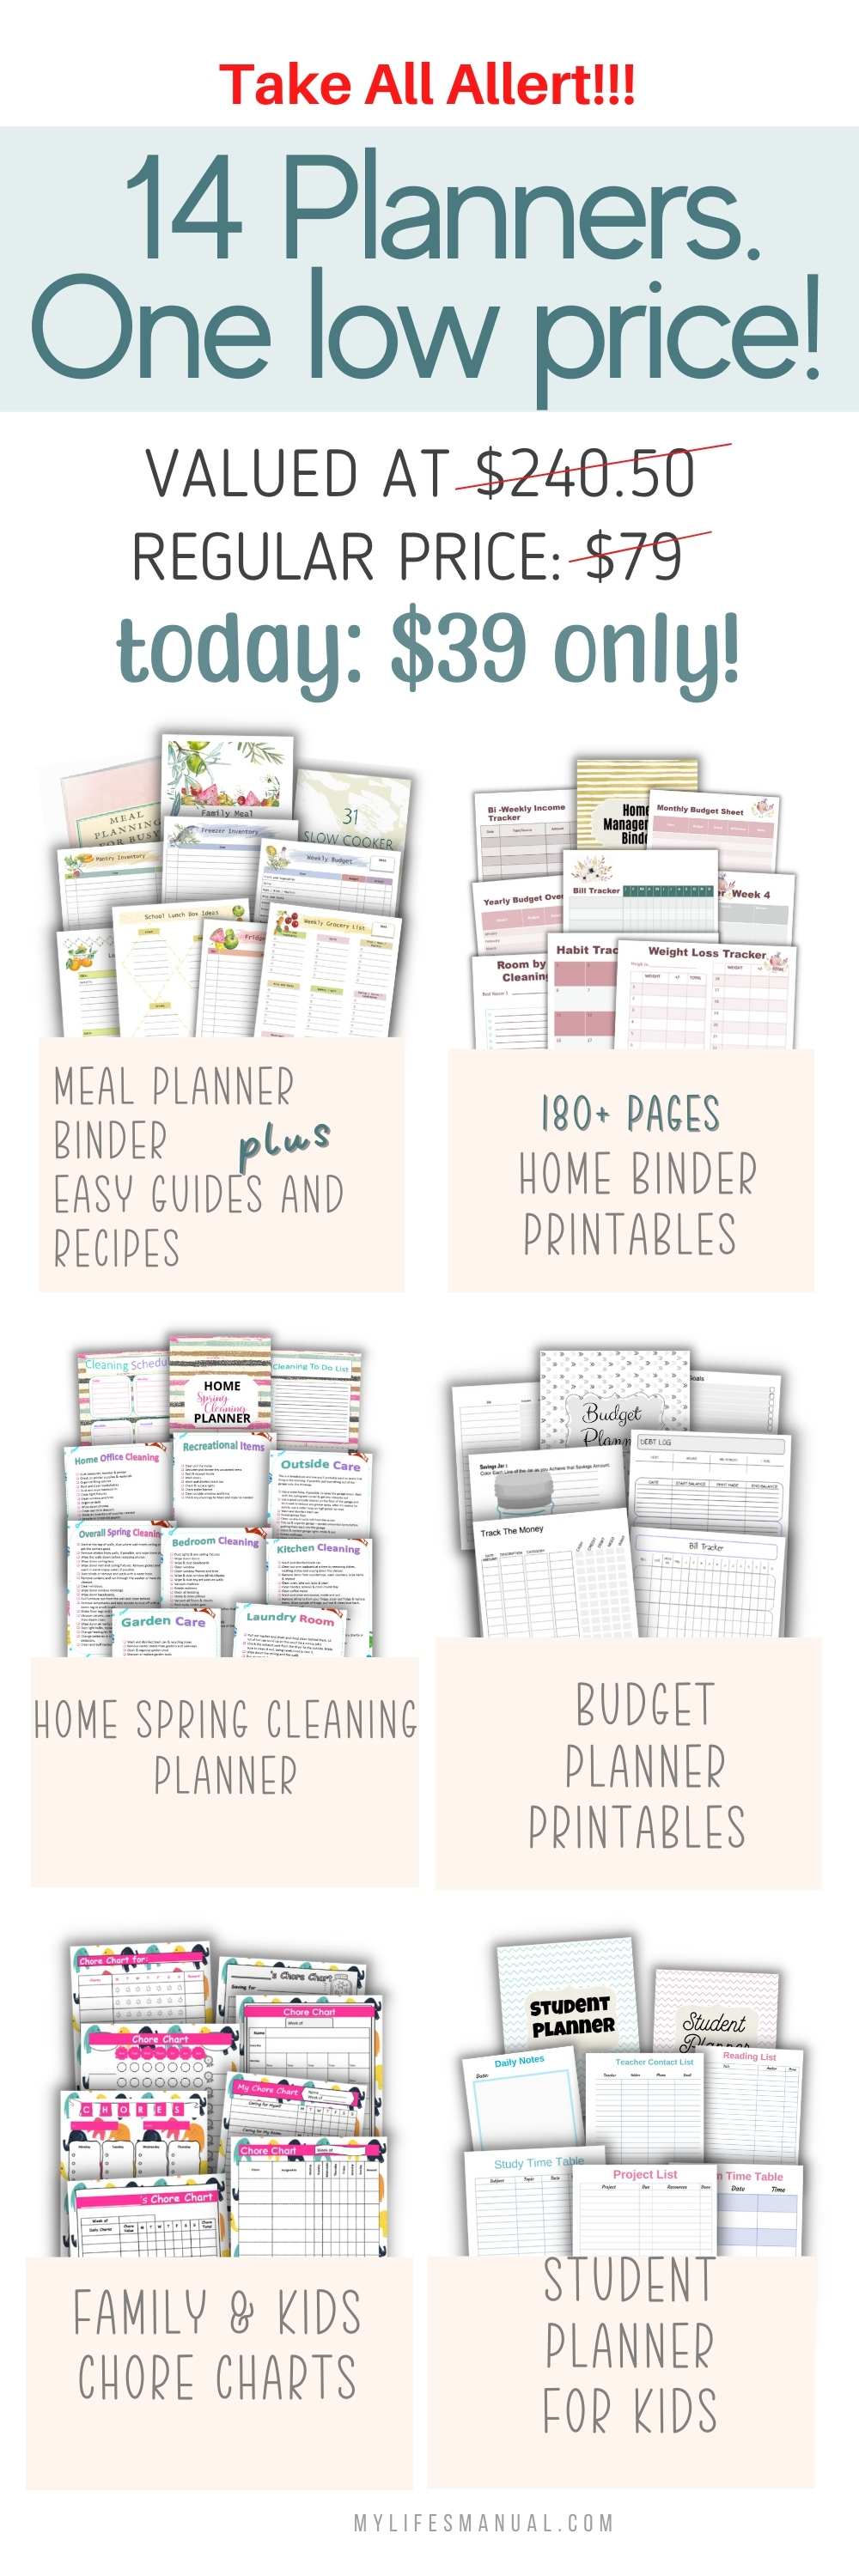 Planner Printables to manage home and life. Want to have planners for different life categories? Take a look at these pretty life planners.